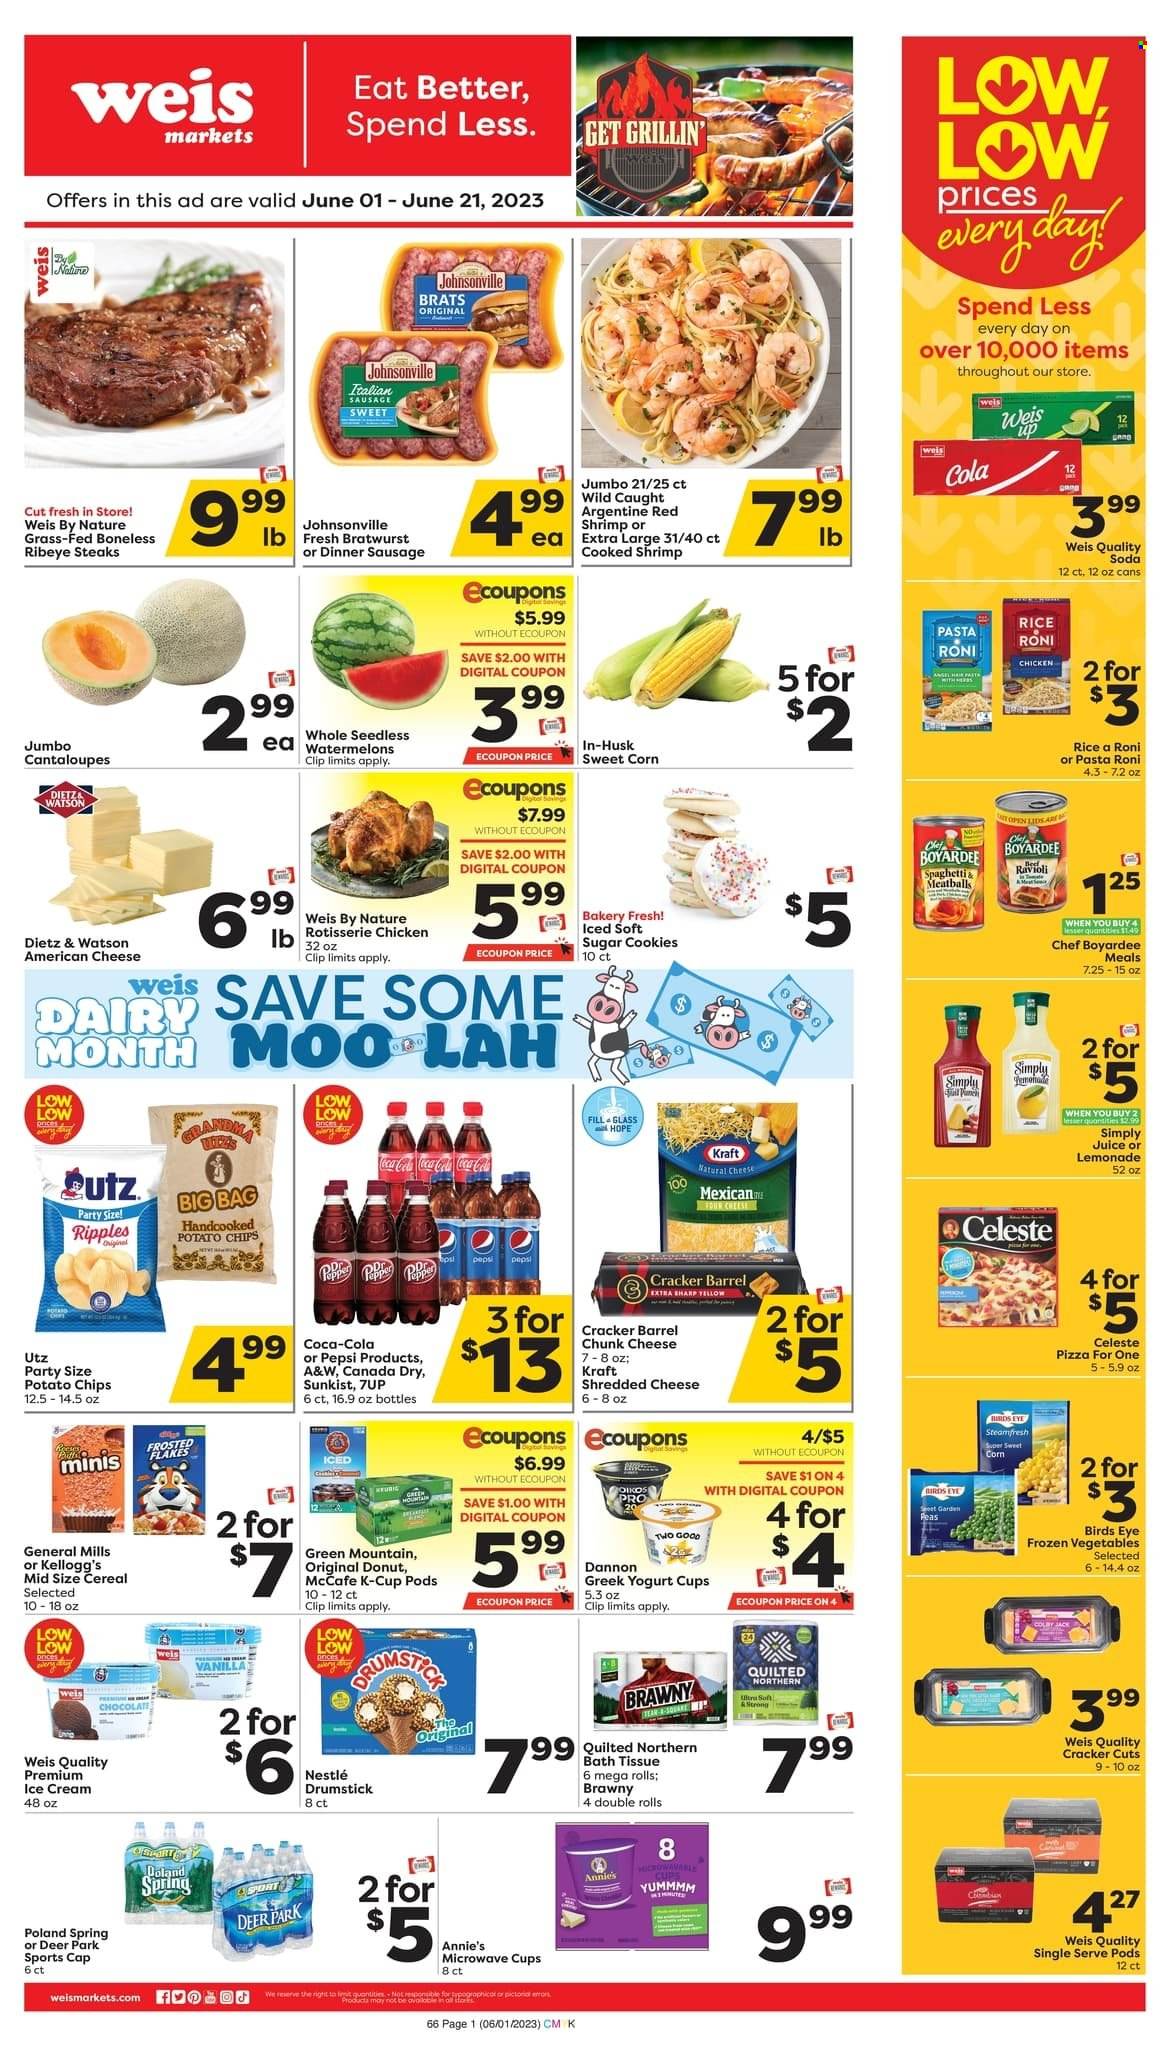 thumbnail - Weis Flyer - 06/01/2023 - 06/21/2023 - Sales products - donut, cantaloupe, corn, sweet corn, watermelon, beef meat, steak, ribeye steak, Johnsonville, shrimps, ravioli, spaghetti, pizza, chicken roast, meatballs, Bird's Eye, Annie's, Kraft®, ready meal, Dietz & Watson, bratwurst, sausage, italian sausage, american cheese, shredded cheese, chunk cheese, greek yoghurt, Oikos, Dannon, ice cream, ice cones, frozen vegetables, Celeste, cookies, Nestlé, crackers, Kellogg's, General Mills, potato chips, Chef Boyardee, cereals, rice, Canada Dry, Coca-Cola, lemonade, Pepsi, juice, soft drink, 7UP, A&W, soda, coffee capsules, McCafe, K-Cups, Green Mountain, red wine, wine, Quilted Northern. Page 1.